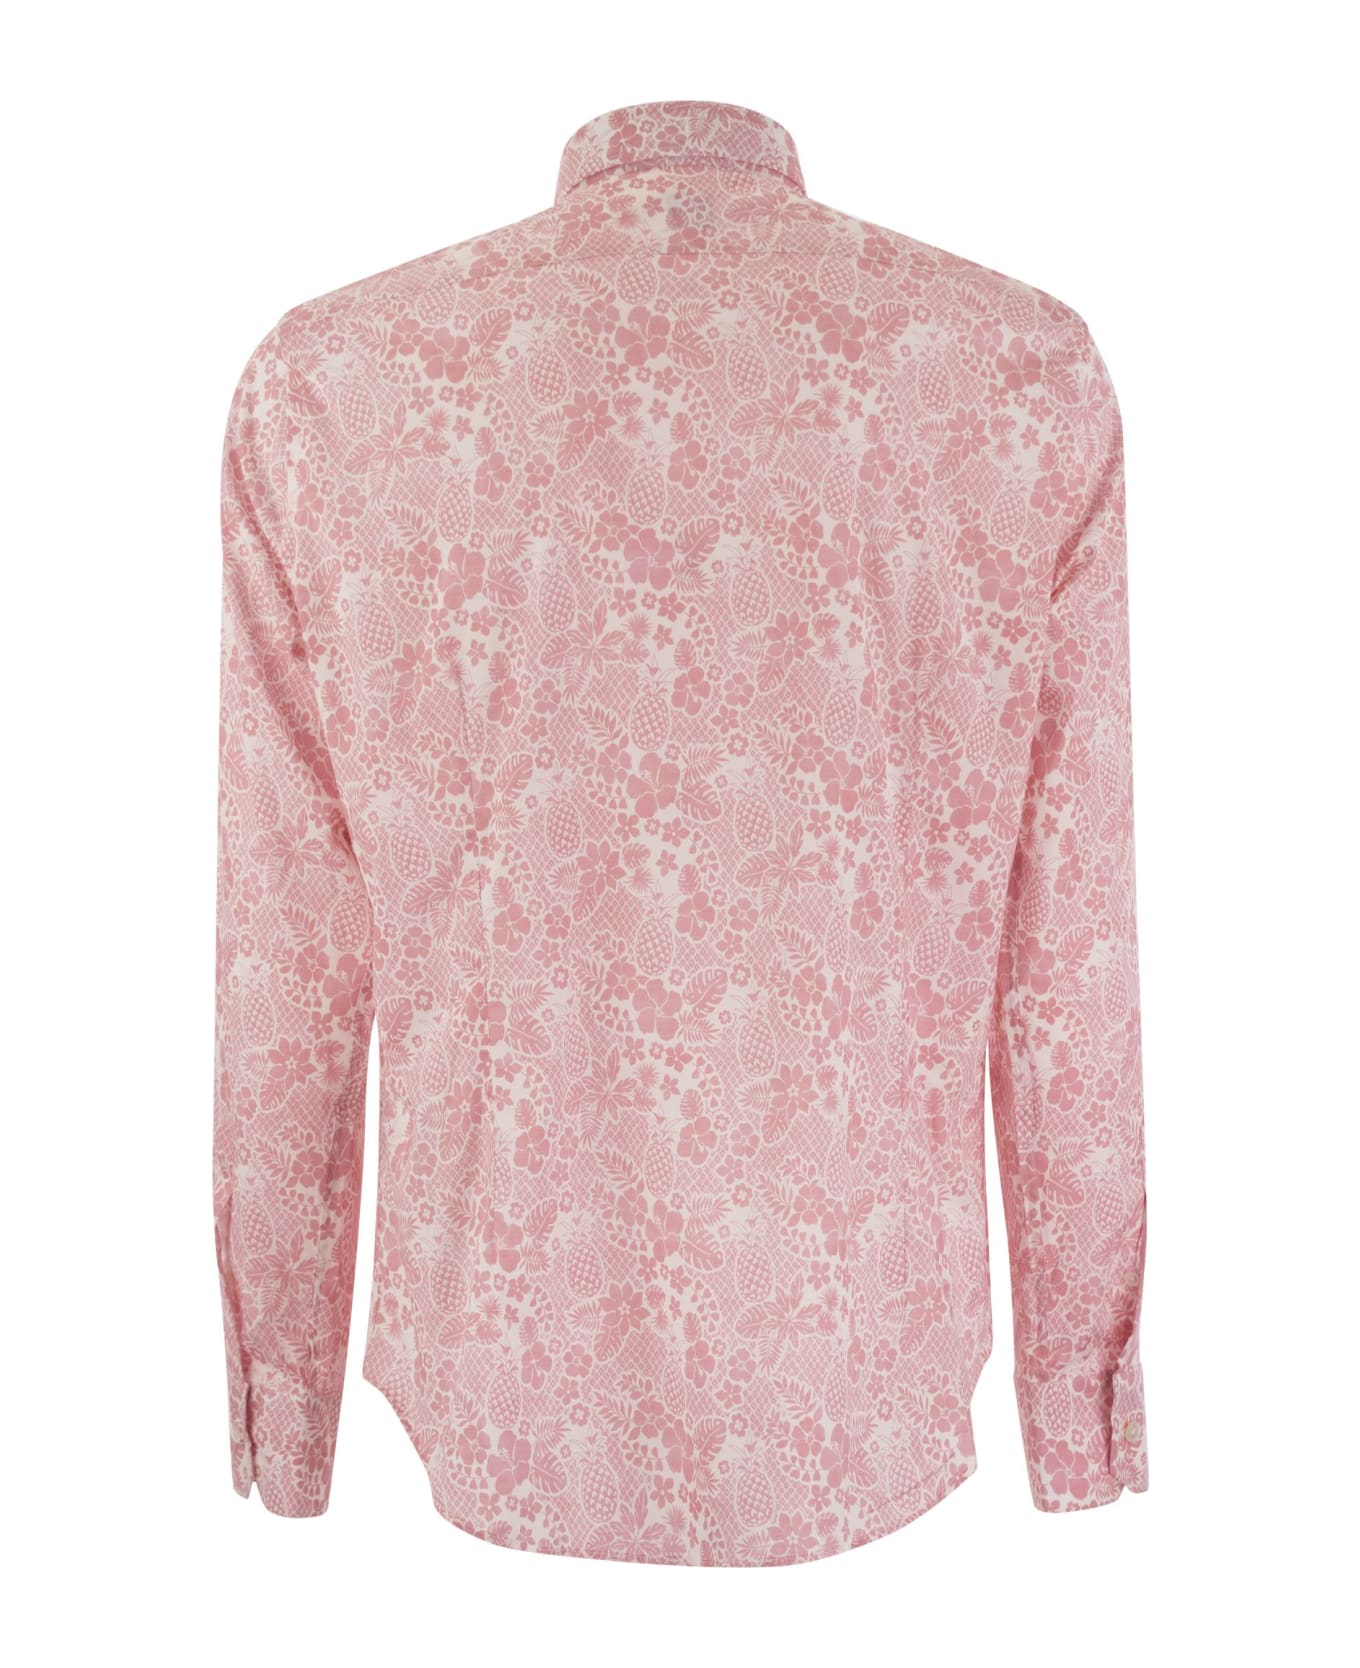 Fedeli Printed Stretch Cotton Voile Shirt - Pink